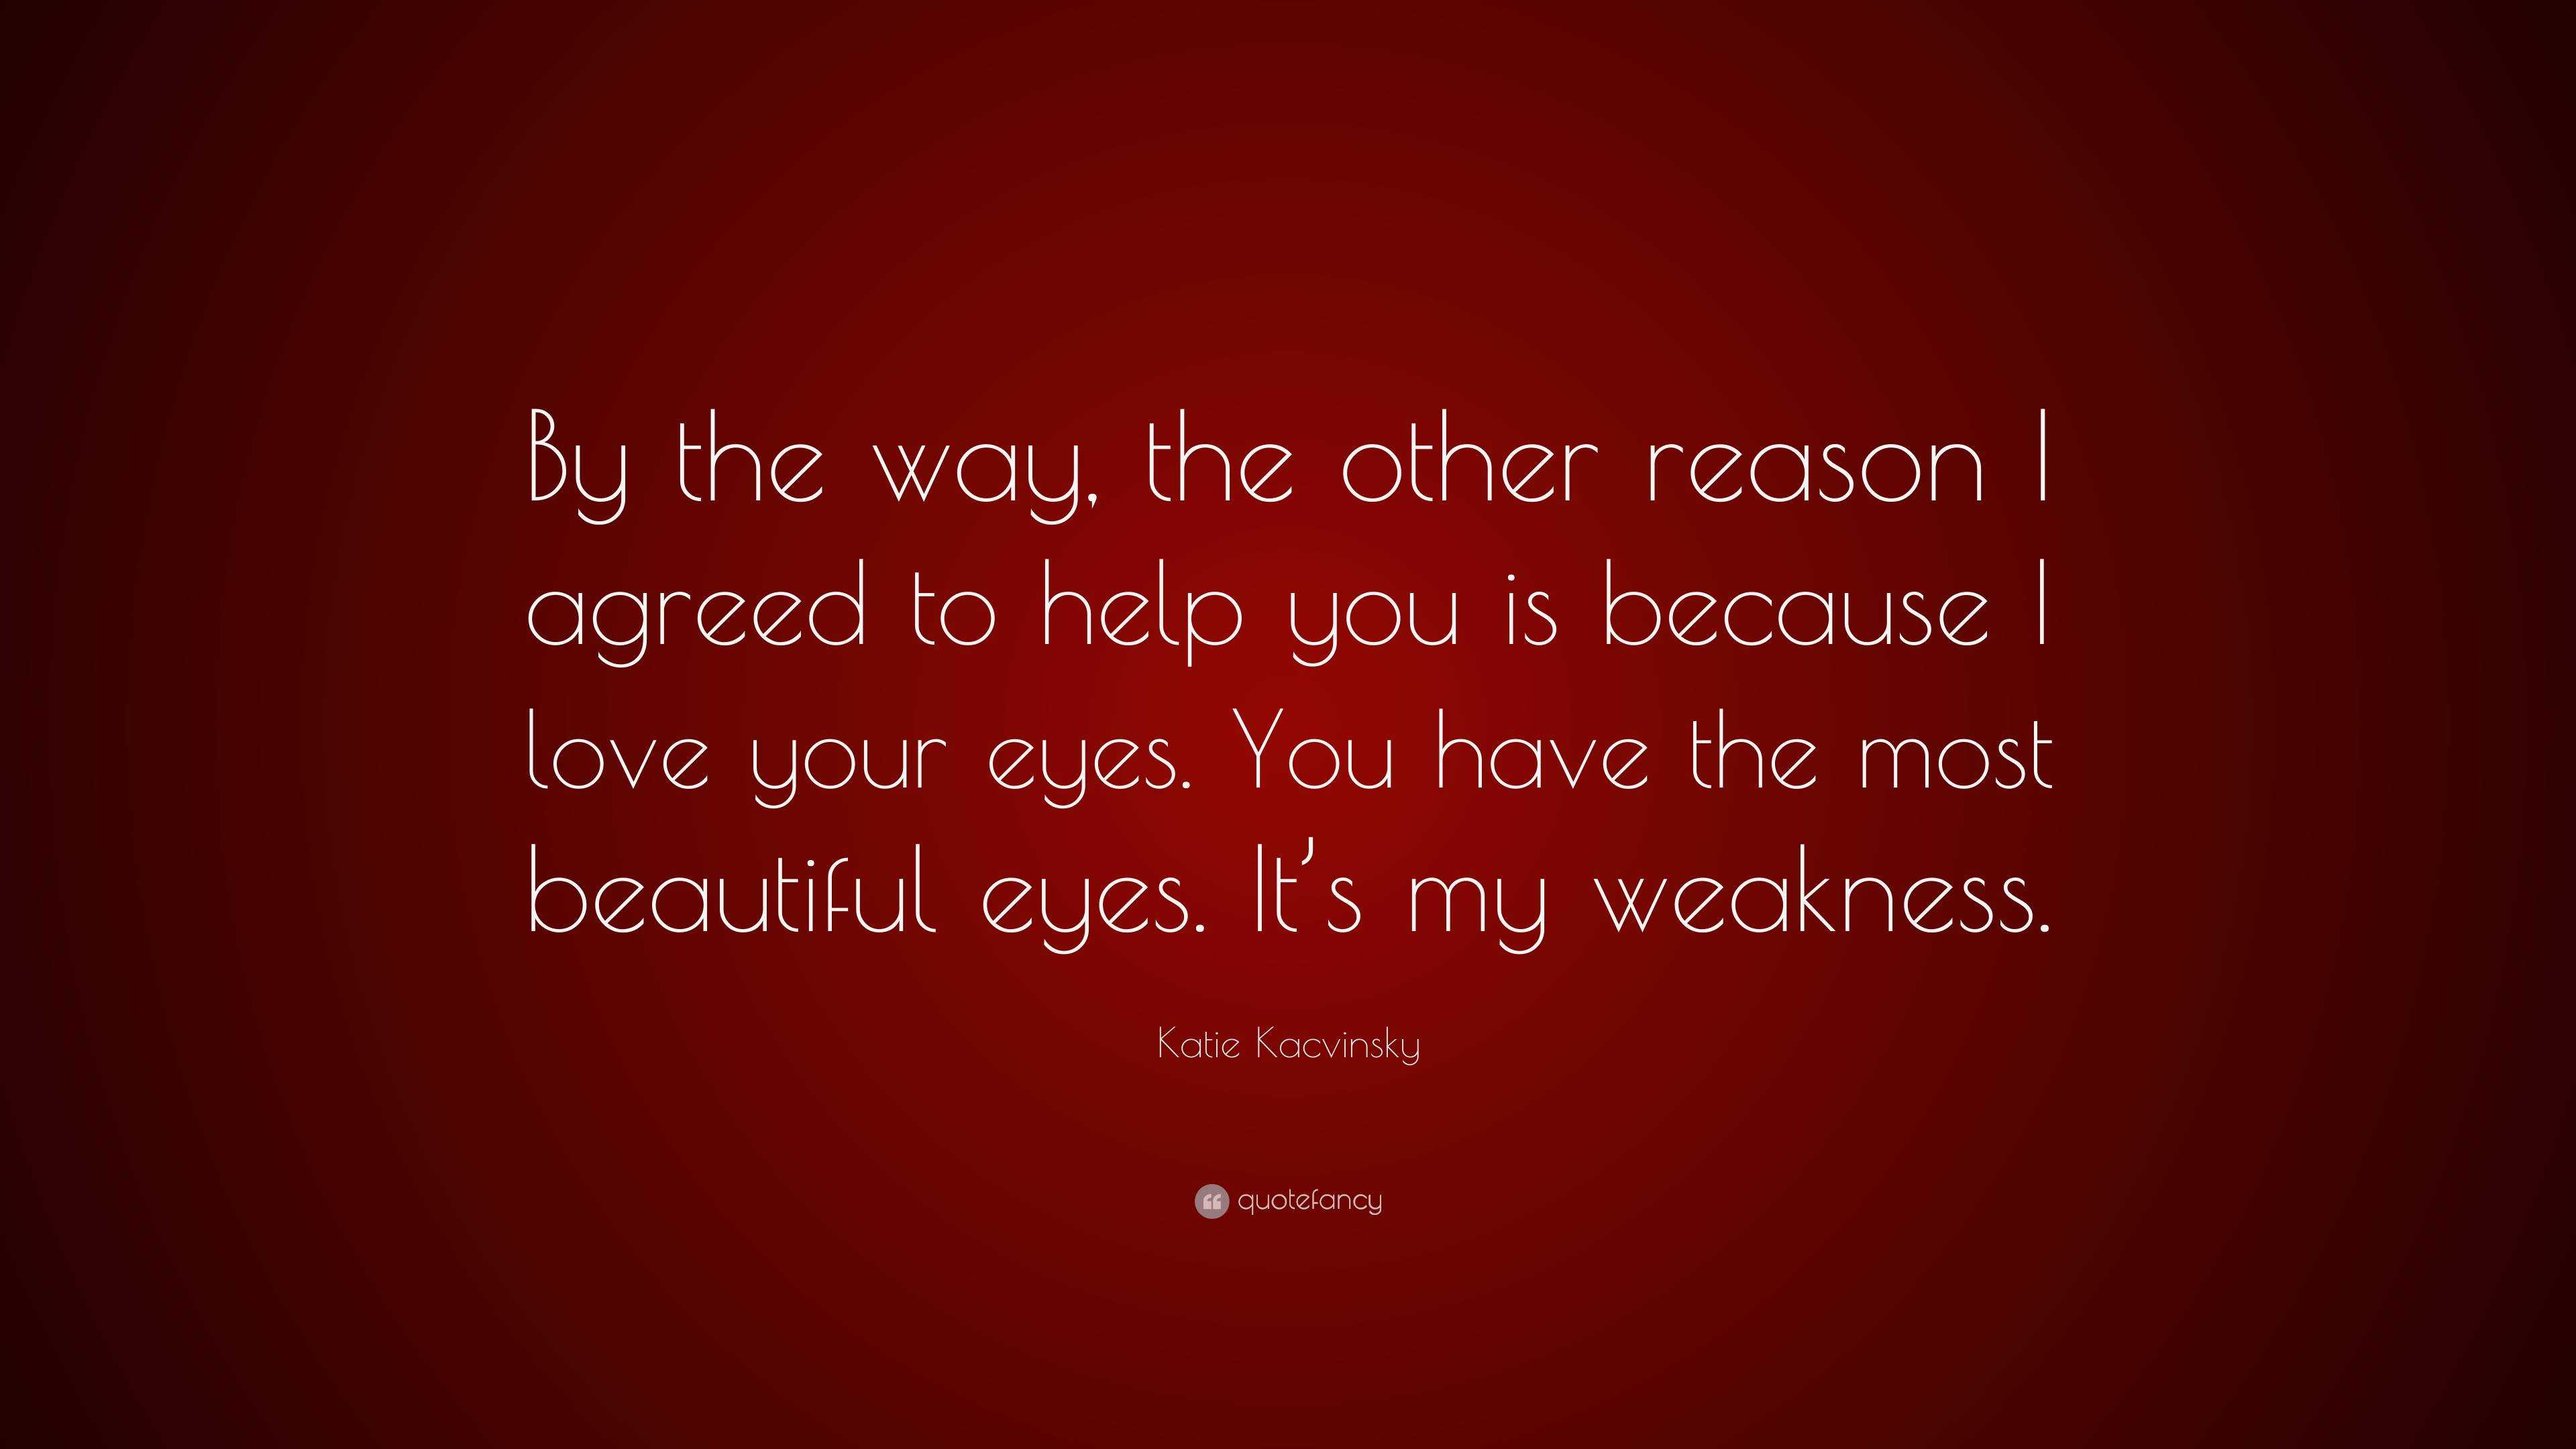 Katie Kacvinsky Quote: “By the way, the other reason I agreed to help you  is because I love your eyes. You have the most beautiful eyes. It's my...”